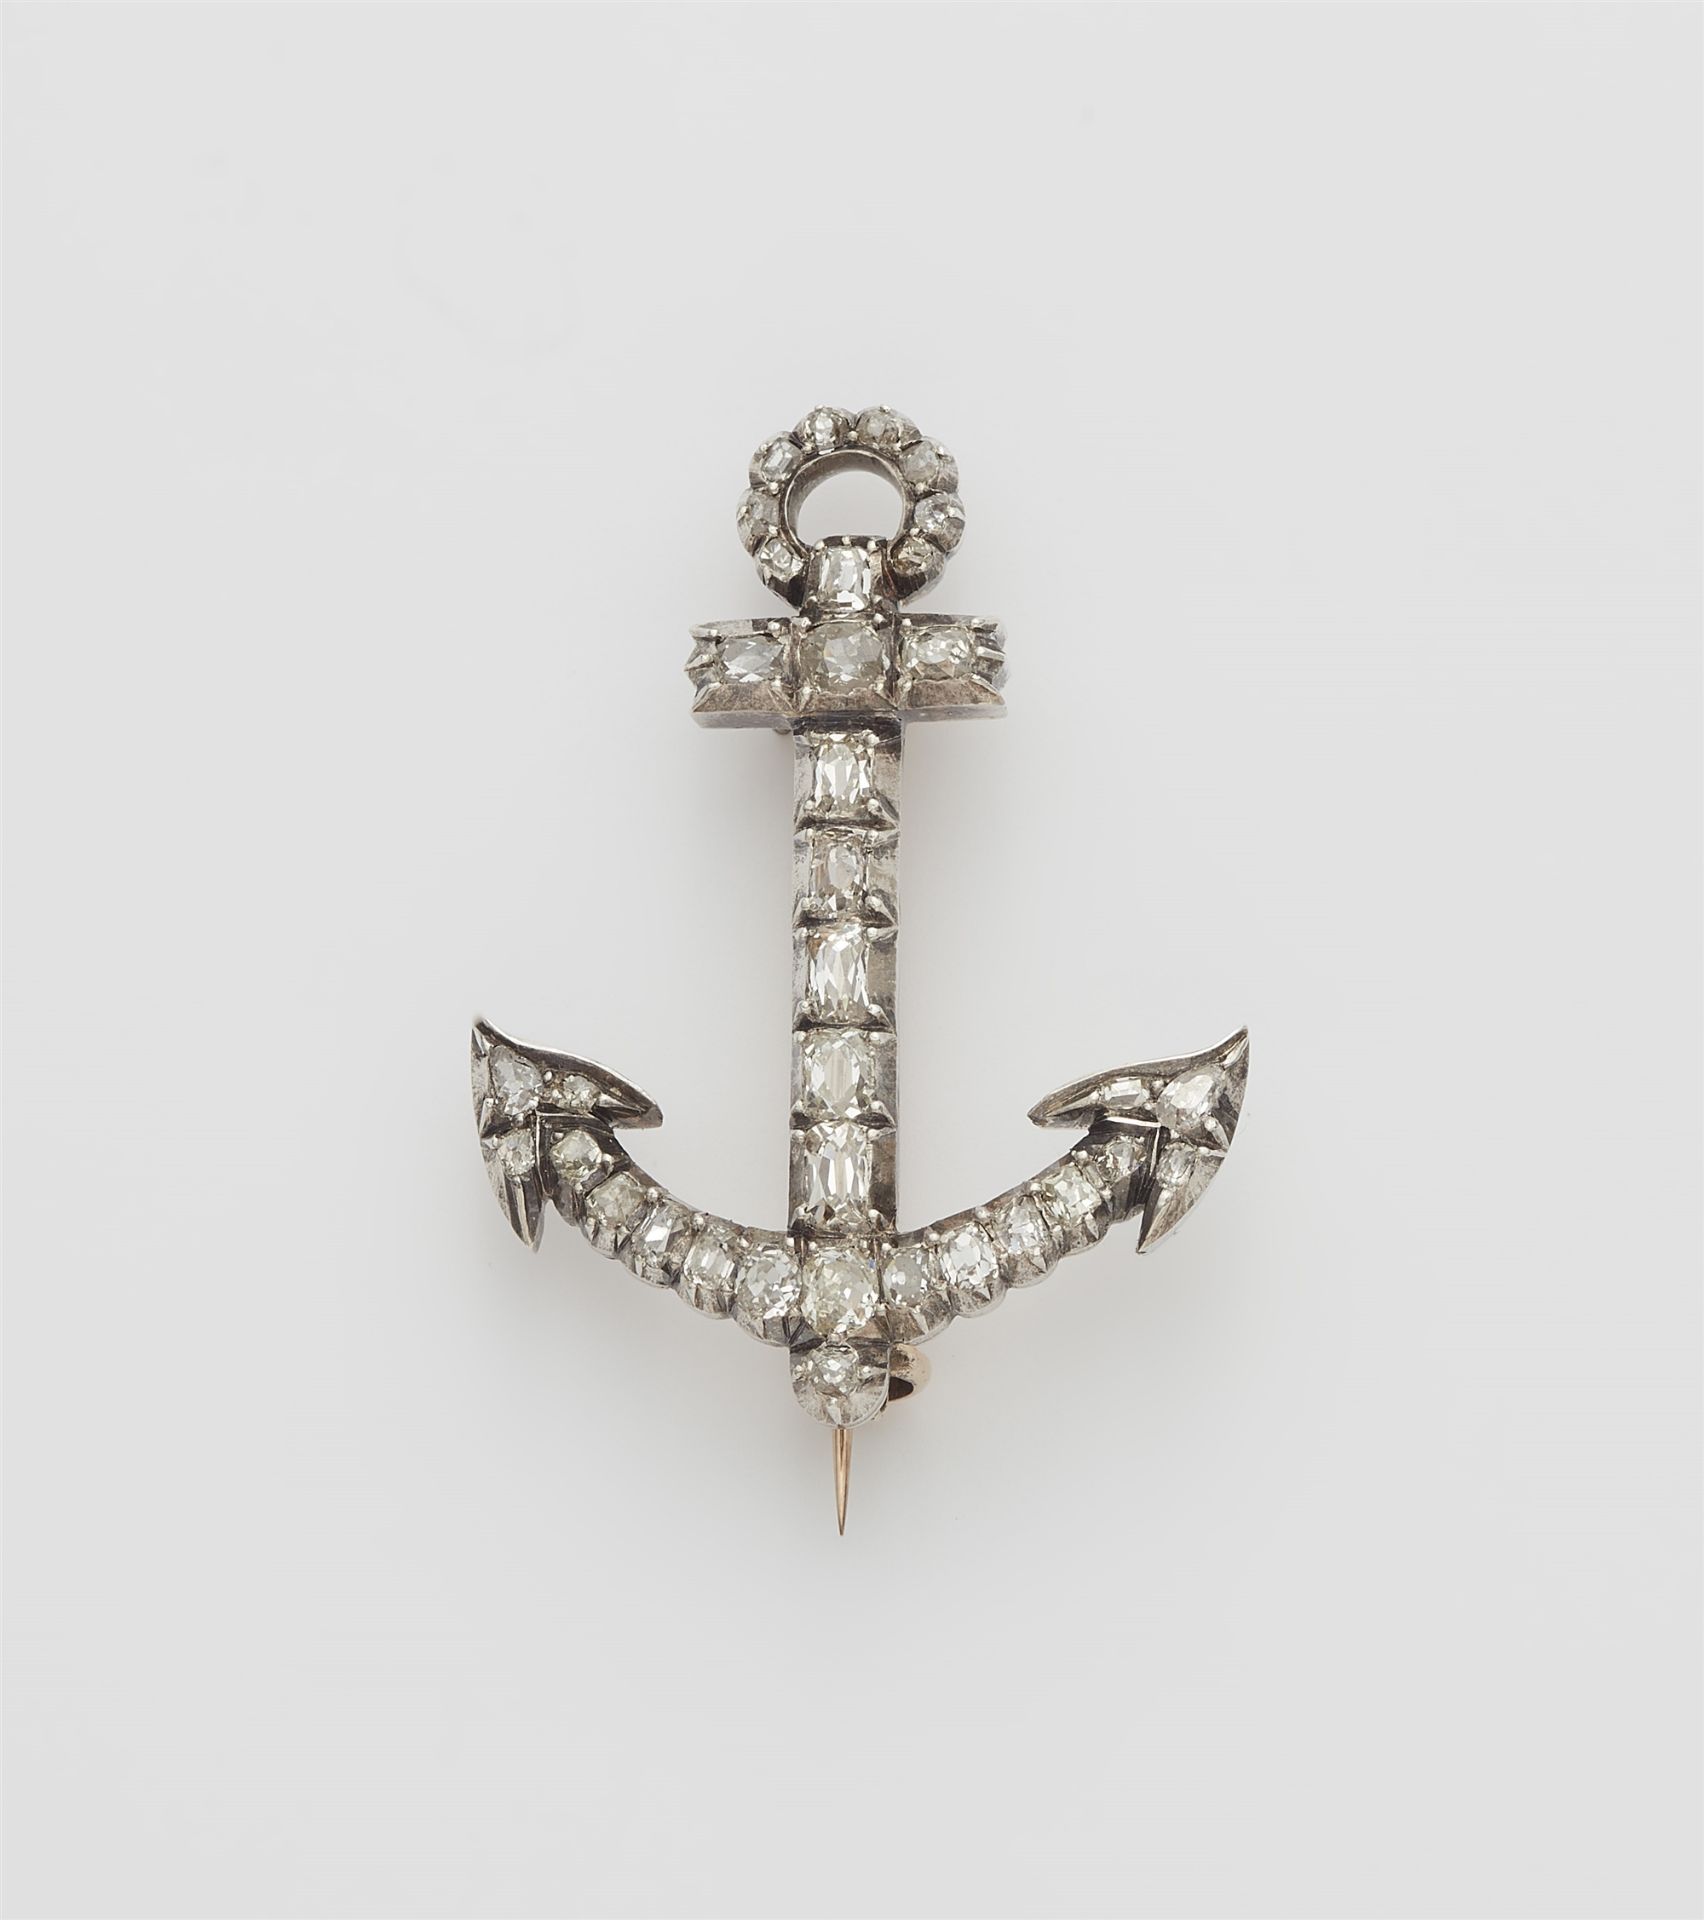 An early 19th century 14k gold, silver and diamond anchor brooch.